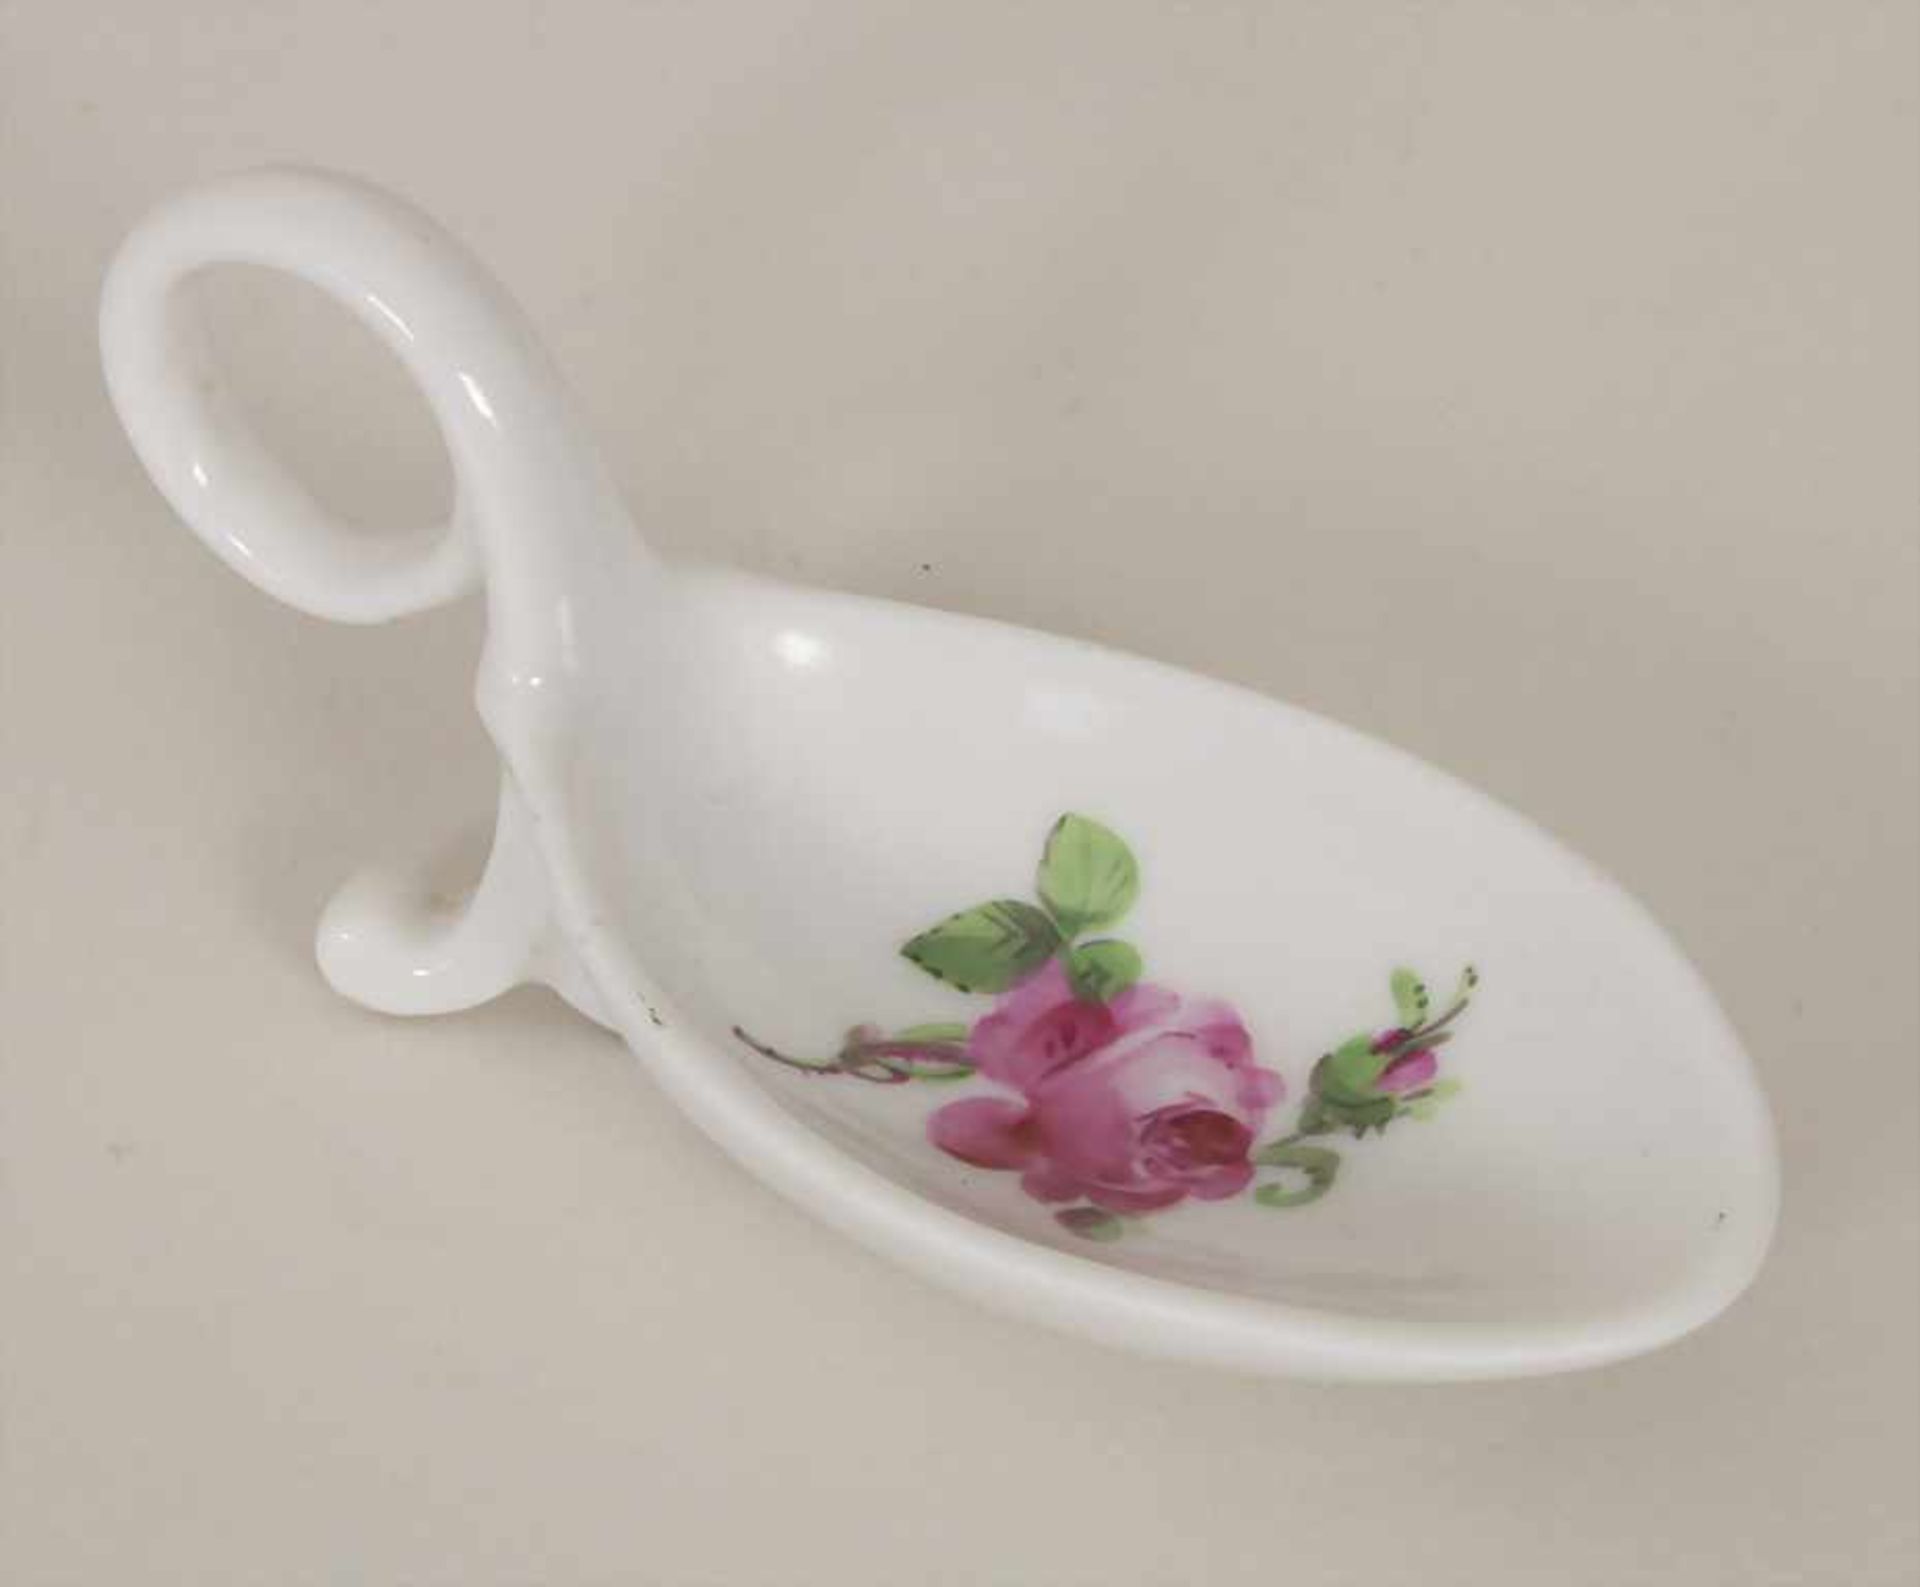 Seltener Löffel 'Rote Rose' / A rare spoon with rose pattern, Meissen, Mitte 19. Jh.Material: